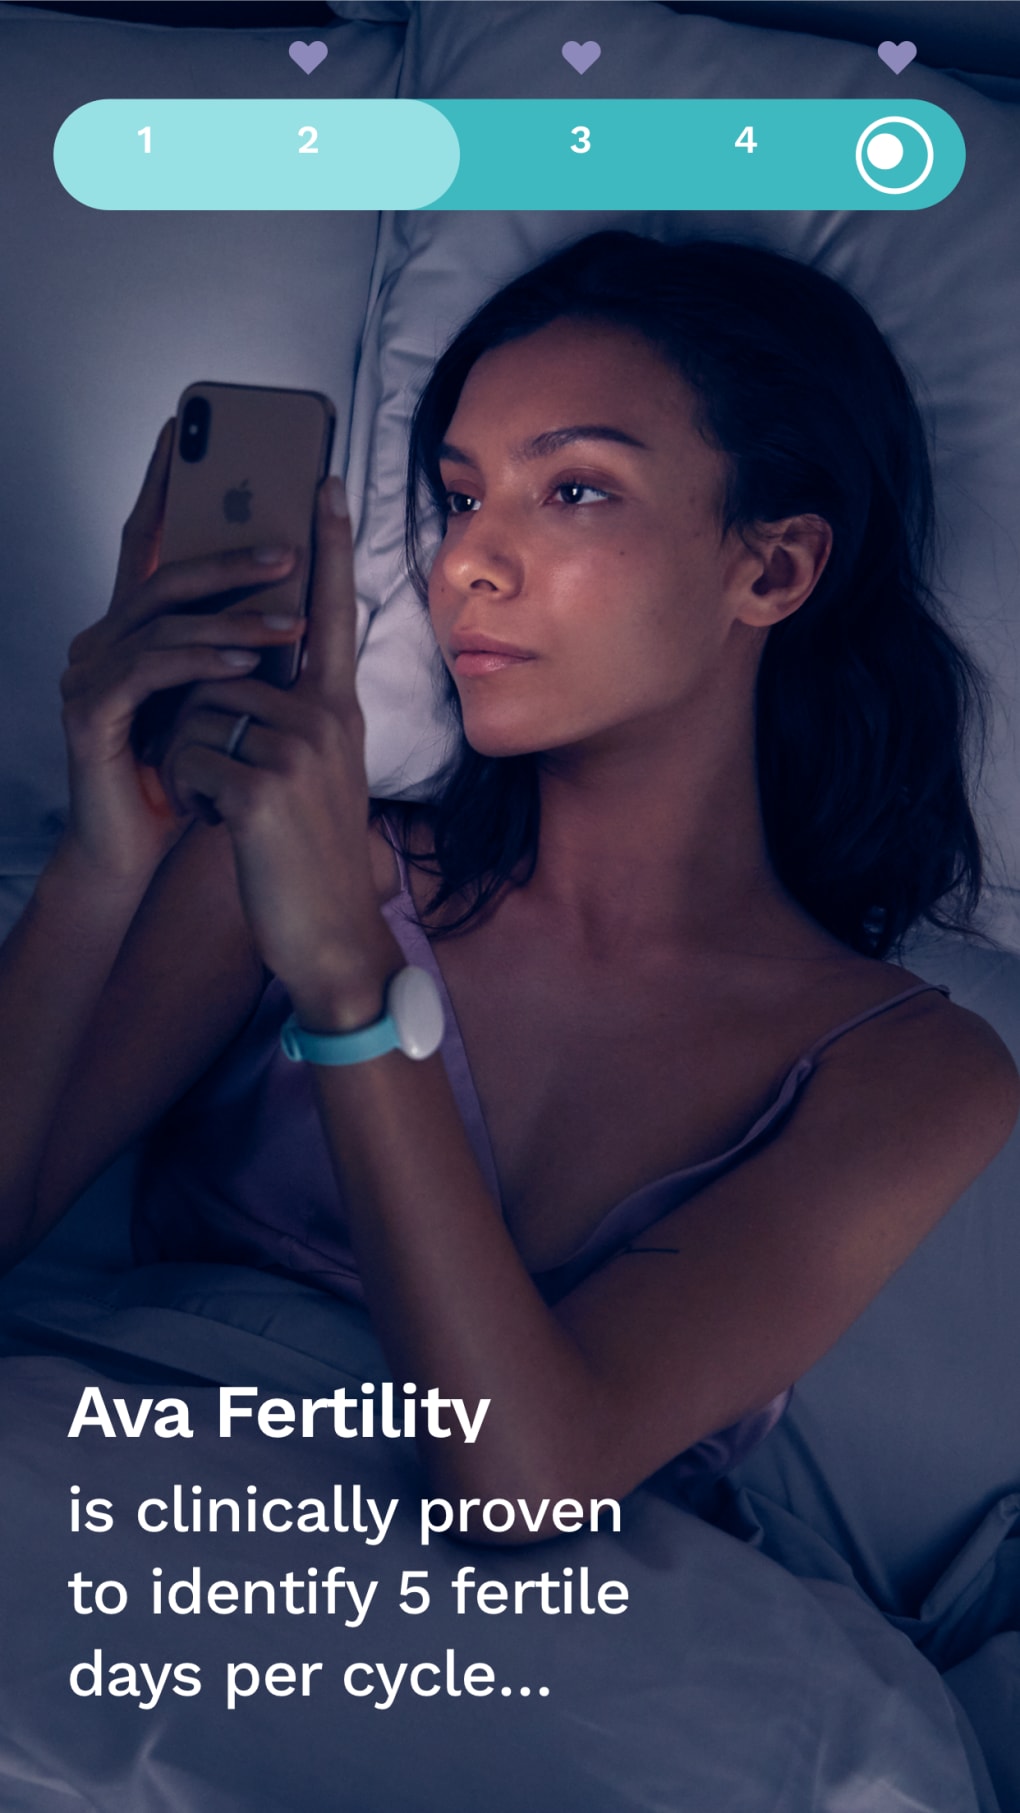 Ava becomes the first and only FDA-cleared fertility tracking wearable